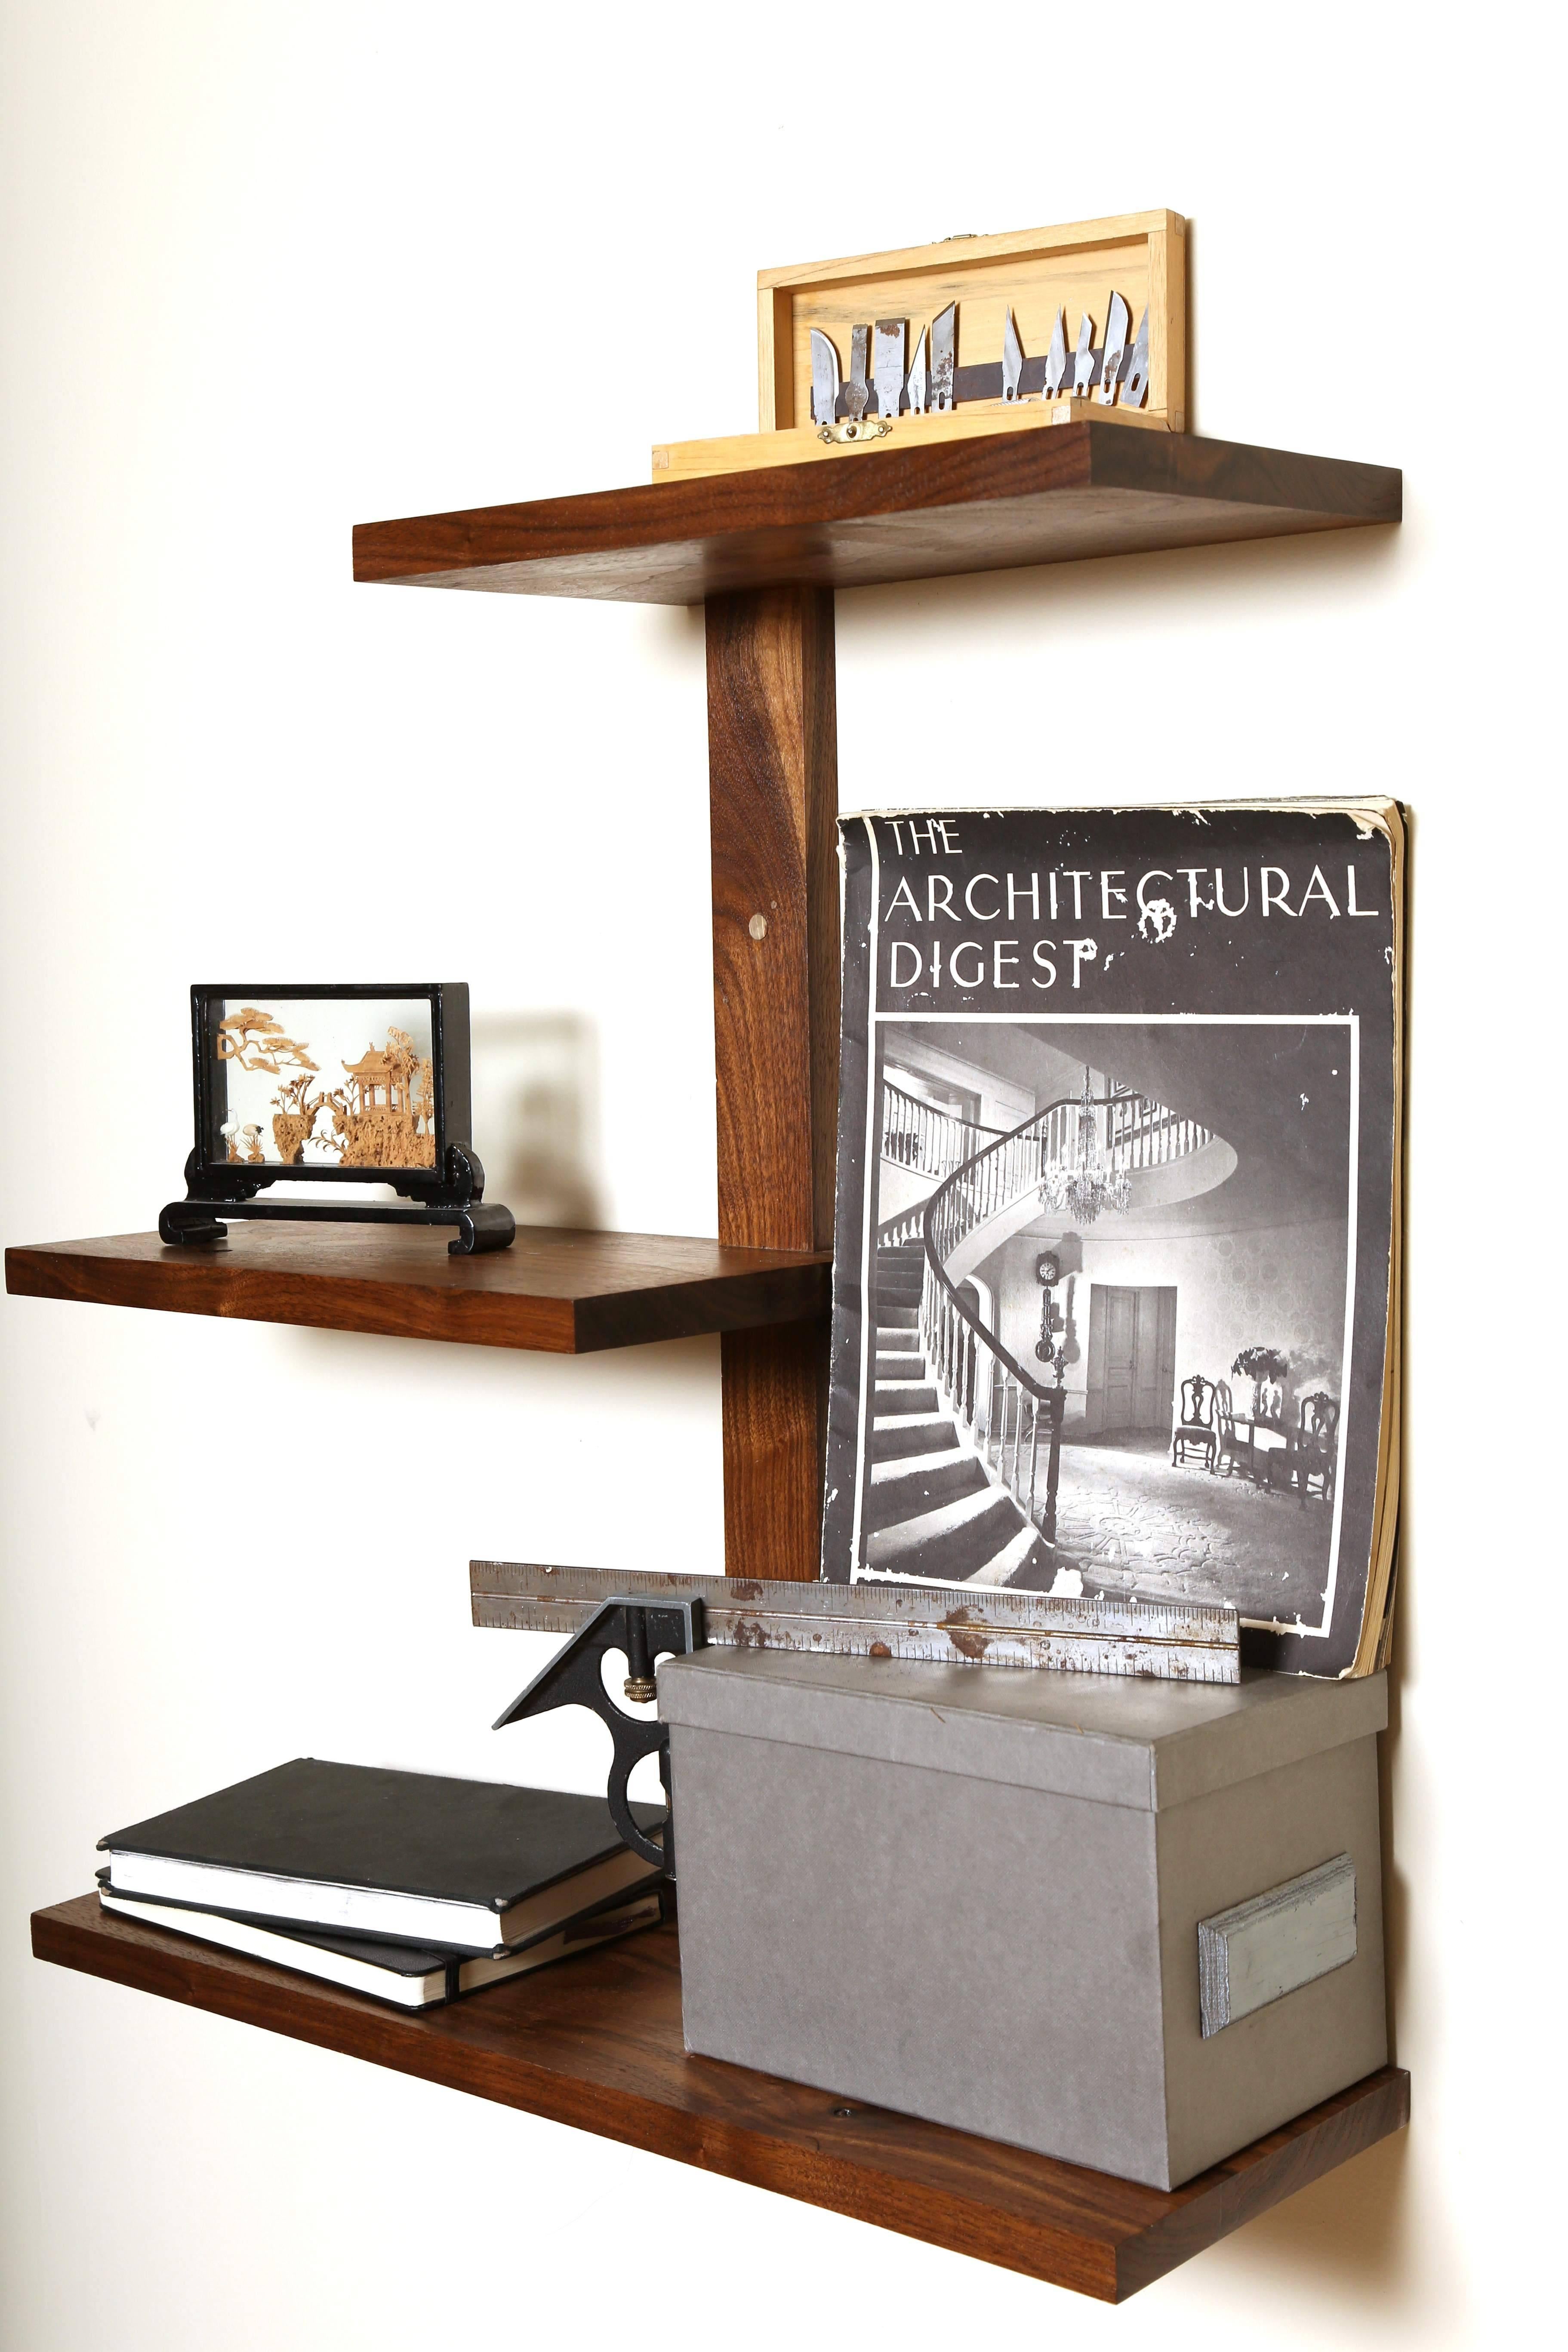 Pictured dimensions: 32 x 8 x 30 inches (L x D x W).

 These Minimalist shelves are made from solid walnut with steel mounting hardware. Everything is made to order and can be customized to any size and quantity of shelves. Installation is quick